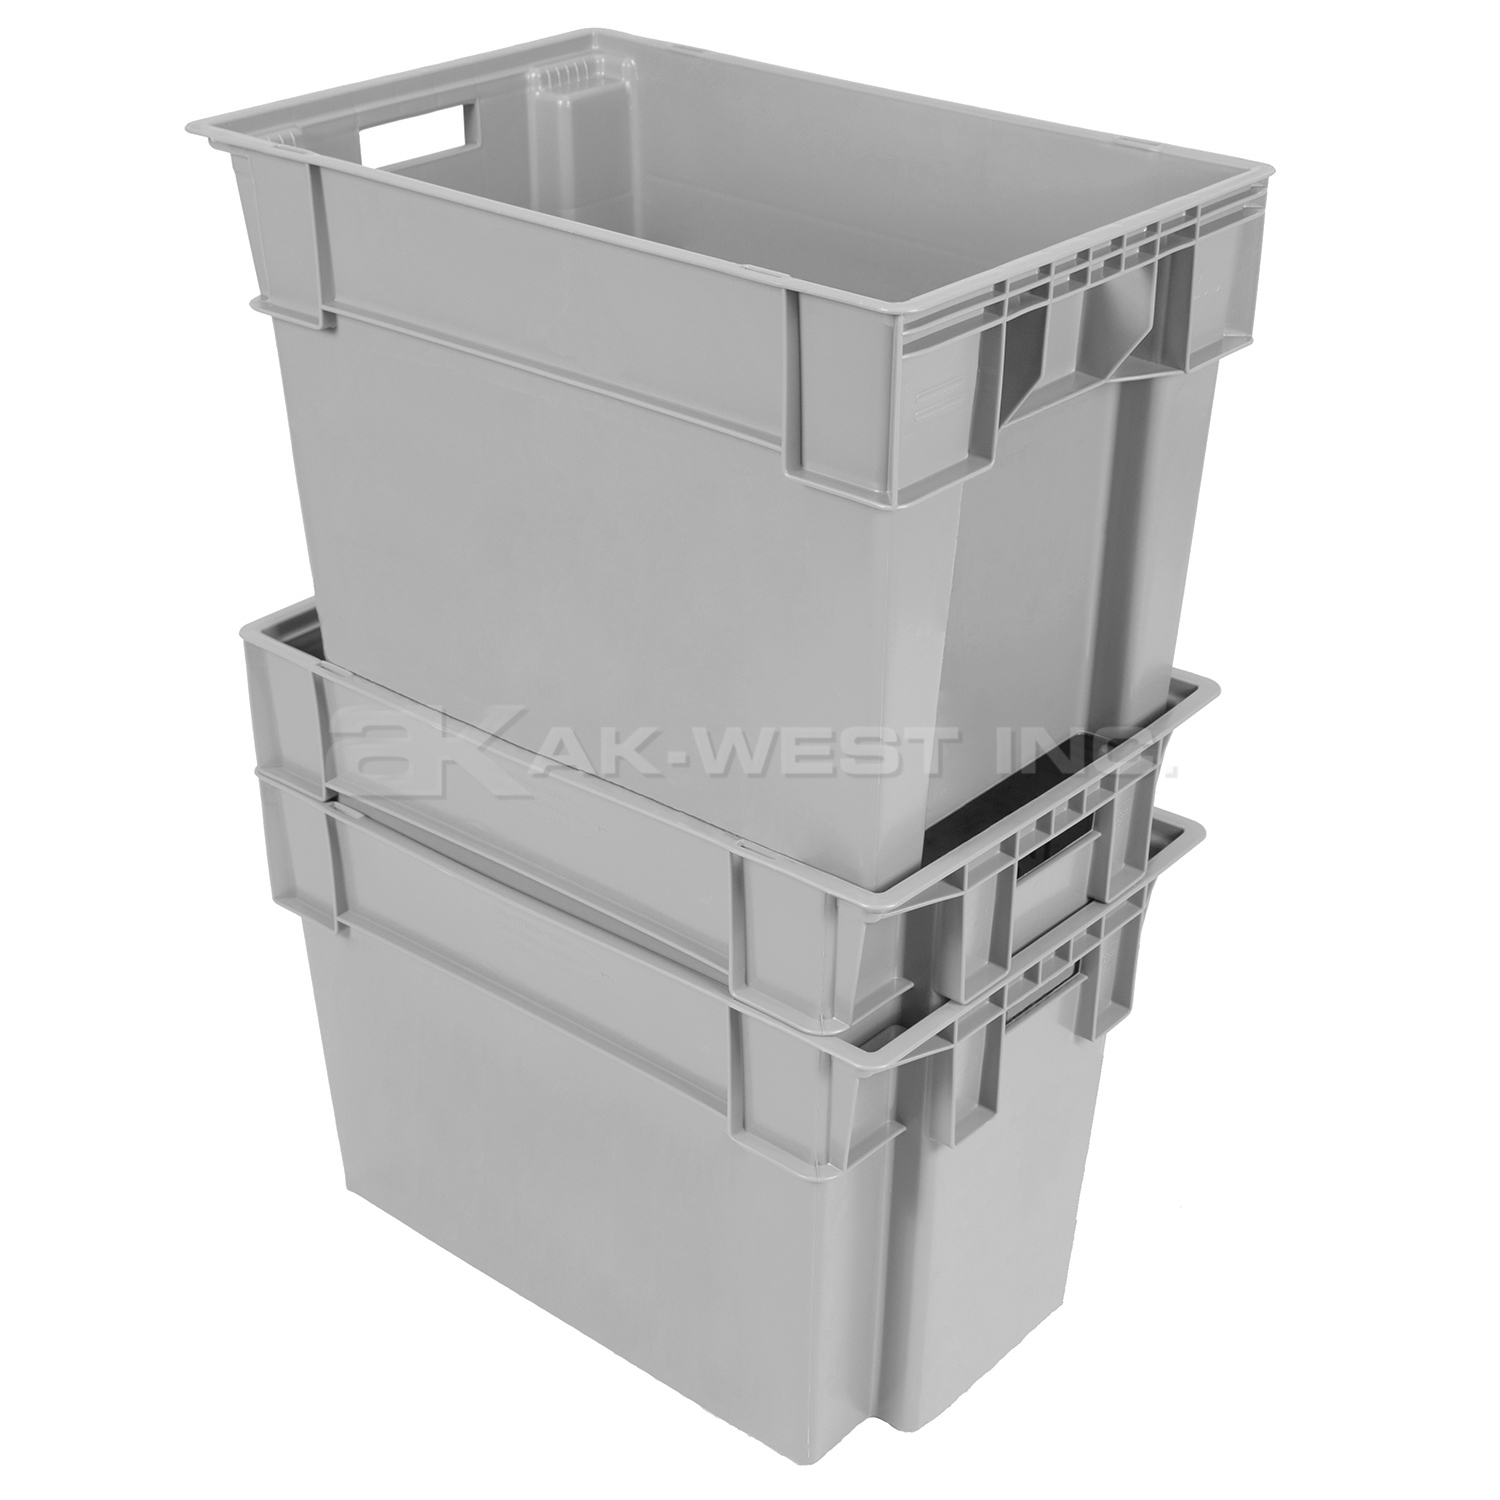 Grey, 24" x 16" x 16", Solid Stack and Nest Container, (Alt. M/N: AC11065)